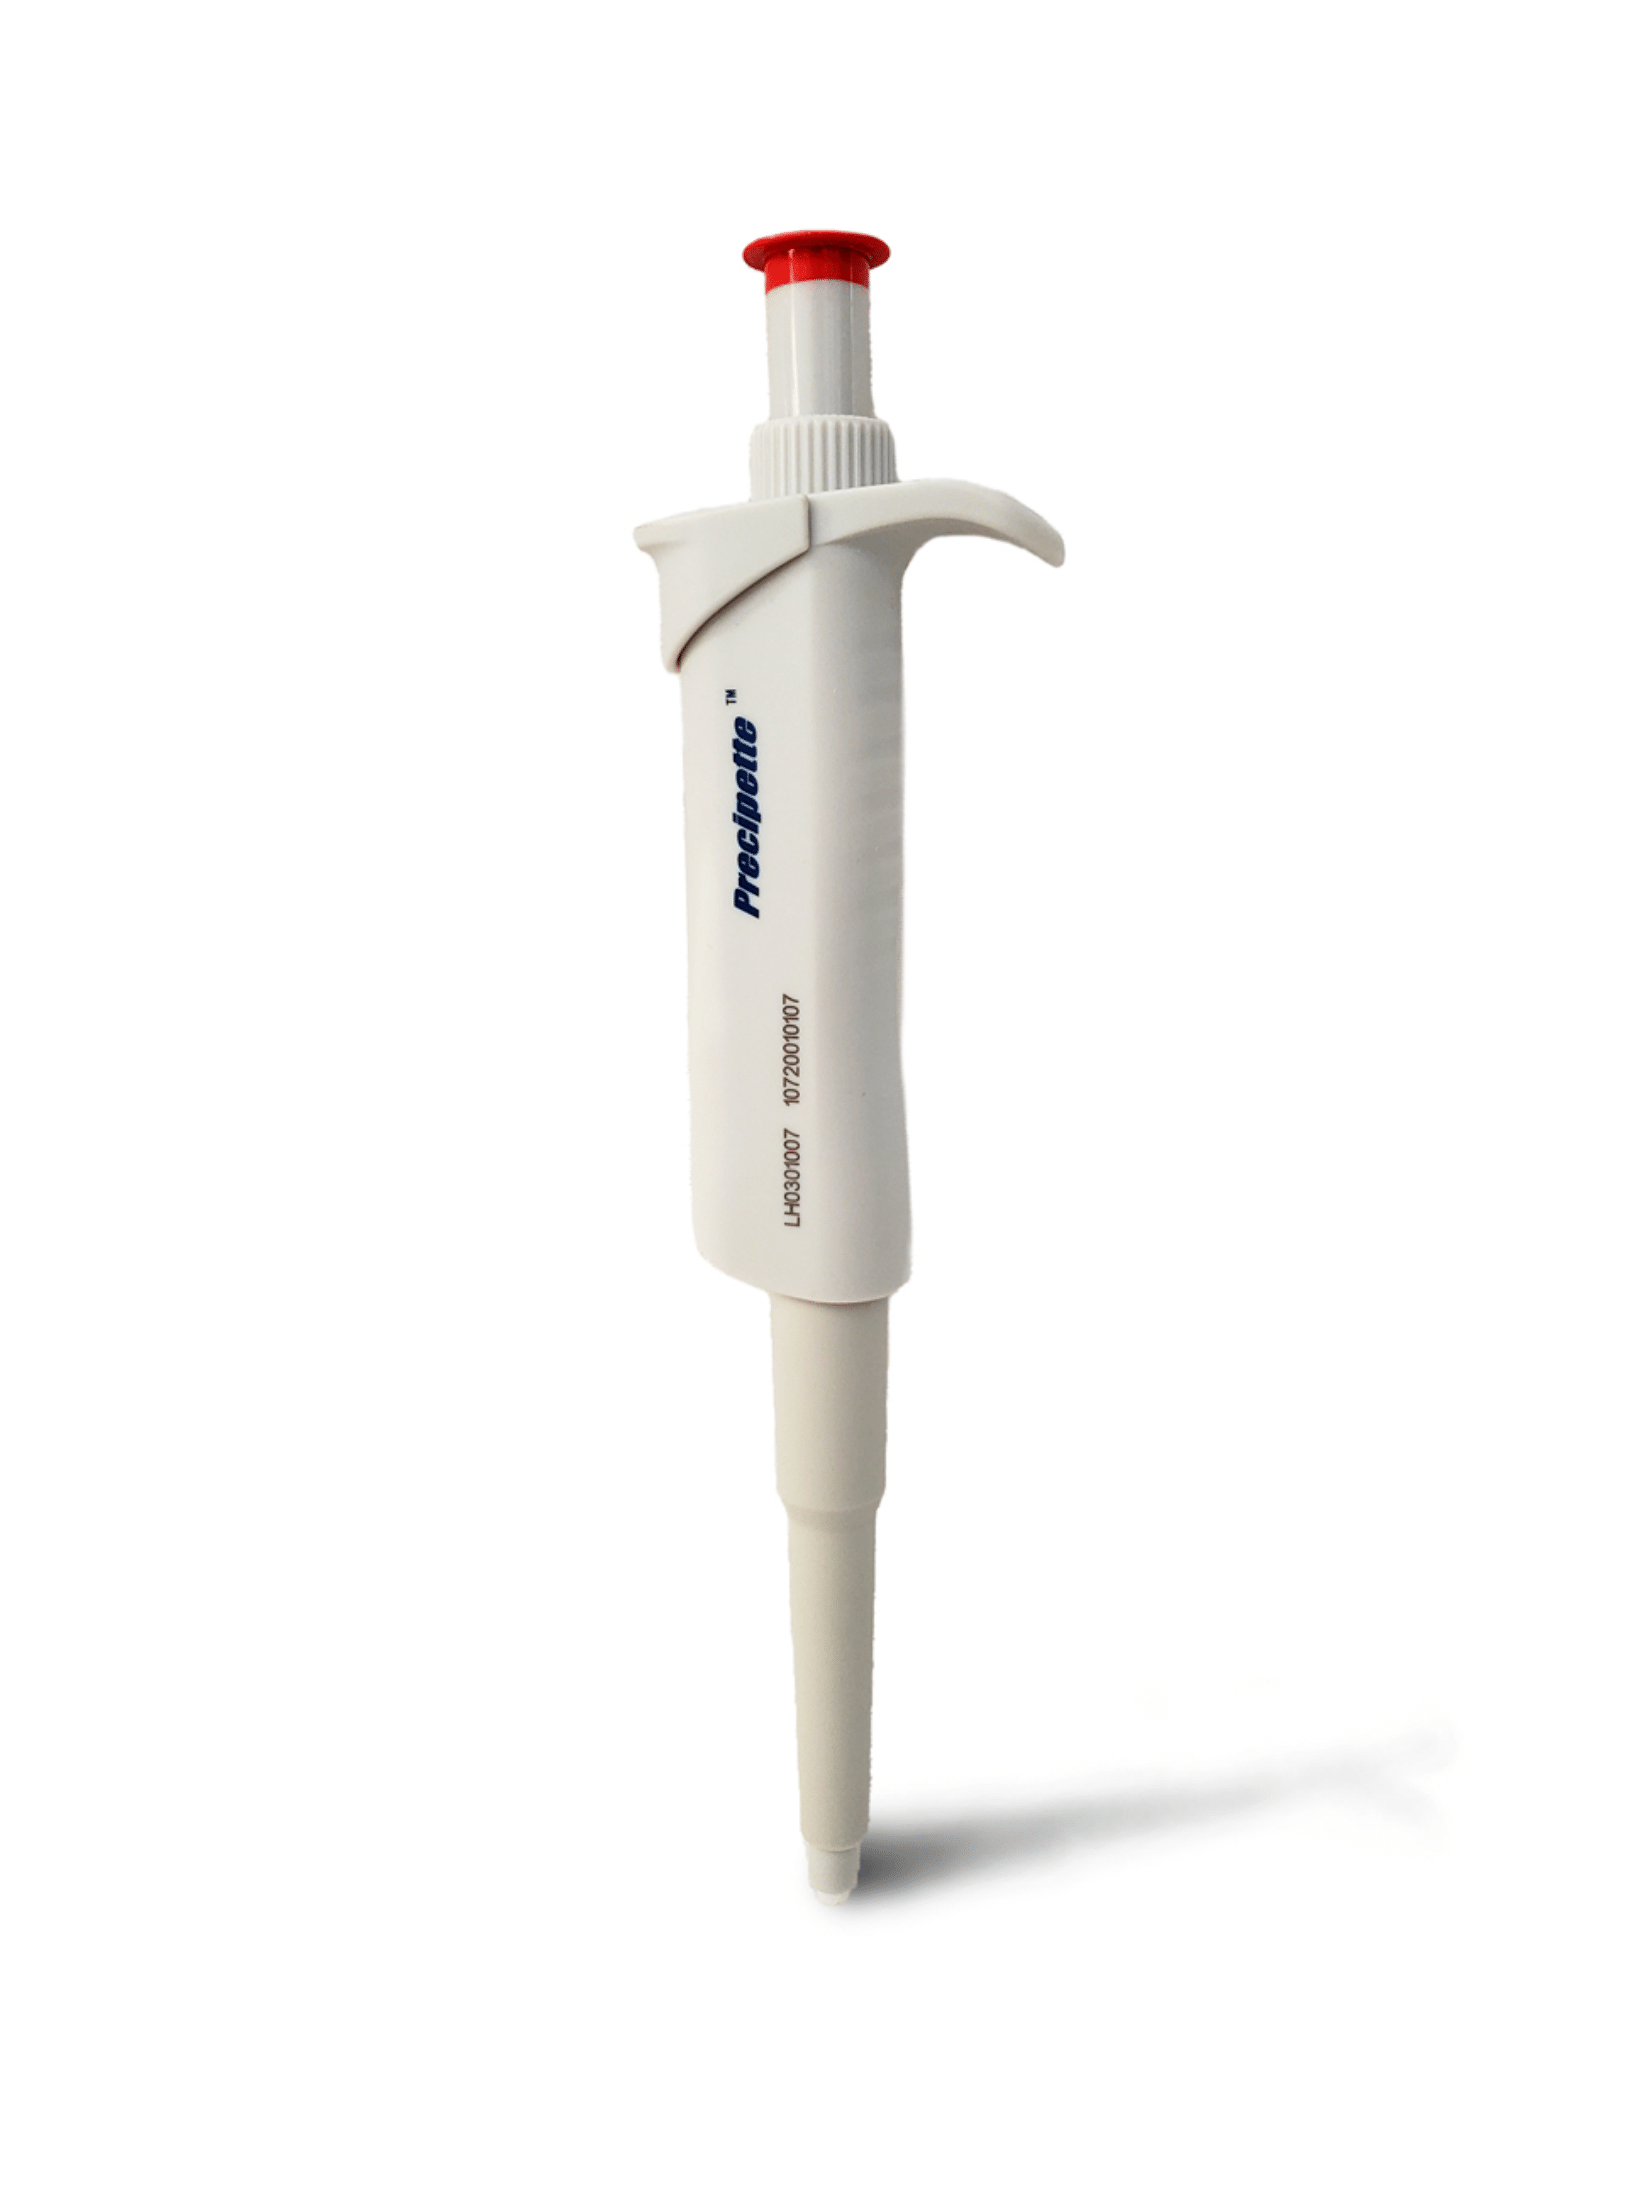 Micro Pipette Standing Up View